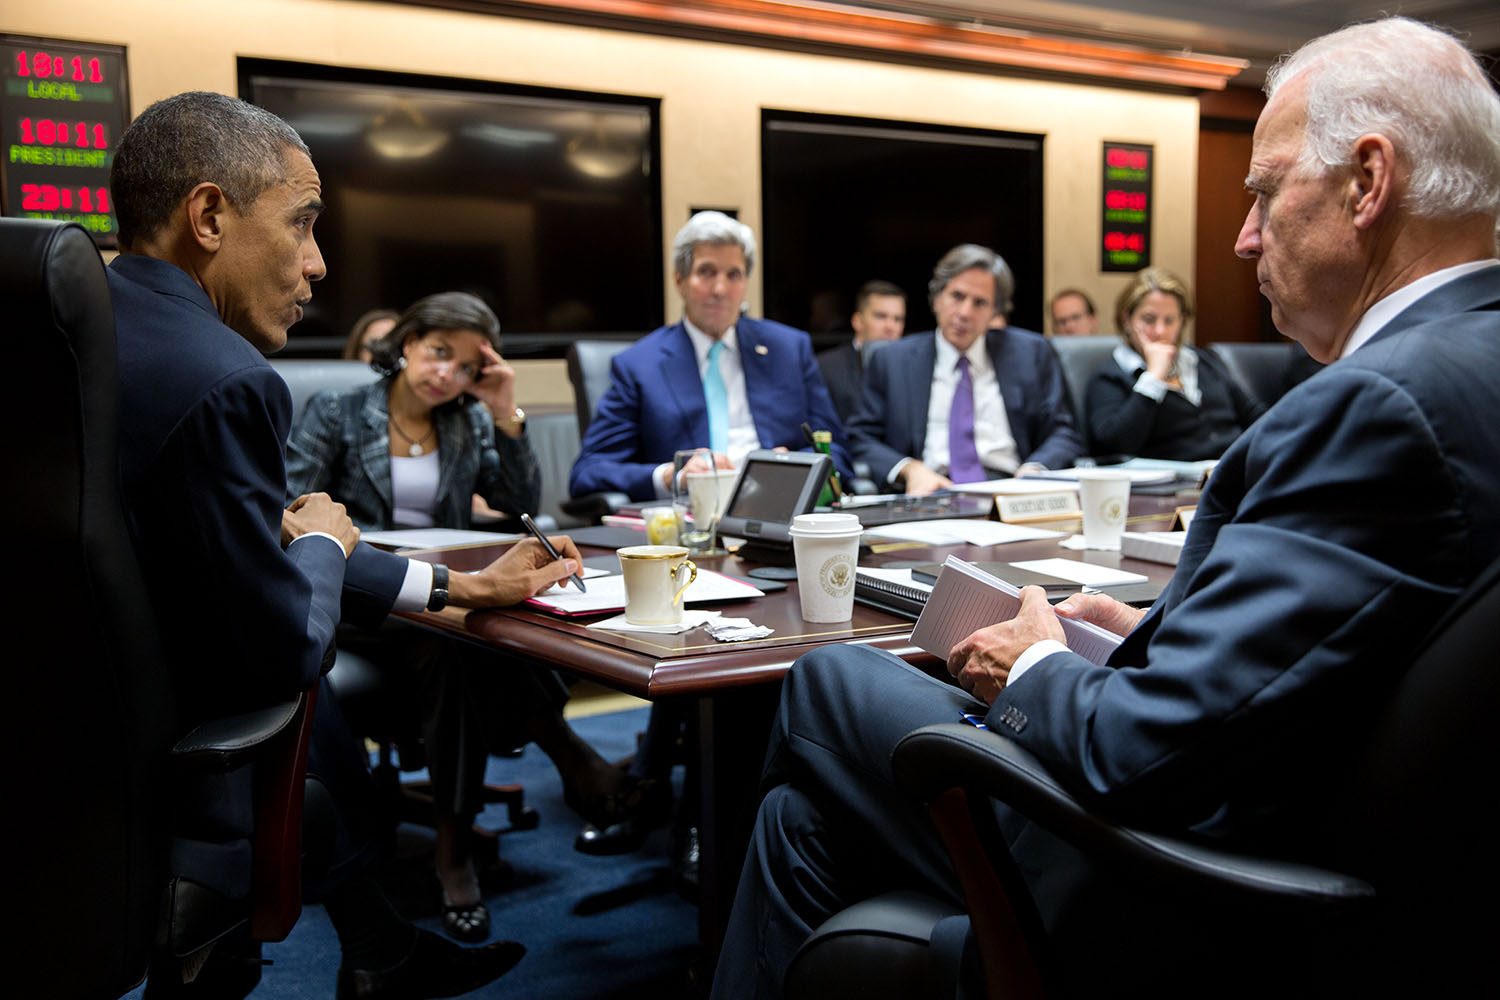 SITUATION ROOM. In this photo, US President Barack Obama, with Vice President Joe Biden, convenes a National Security Council meeting in the Situation Room of the White House, Dec. 1, 2014. Seated with them from left are National Security Advisor Susan E. Rice, Secretary of State John Kerry, Tony Blinken, Deputy National Security Advisor and Lisa Monaco, Assistant to the President for Homeland Security and Counterterrorism. Official White House Photo by Pete Souza 